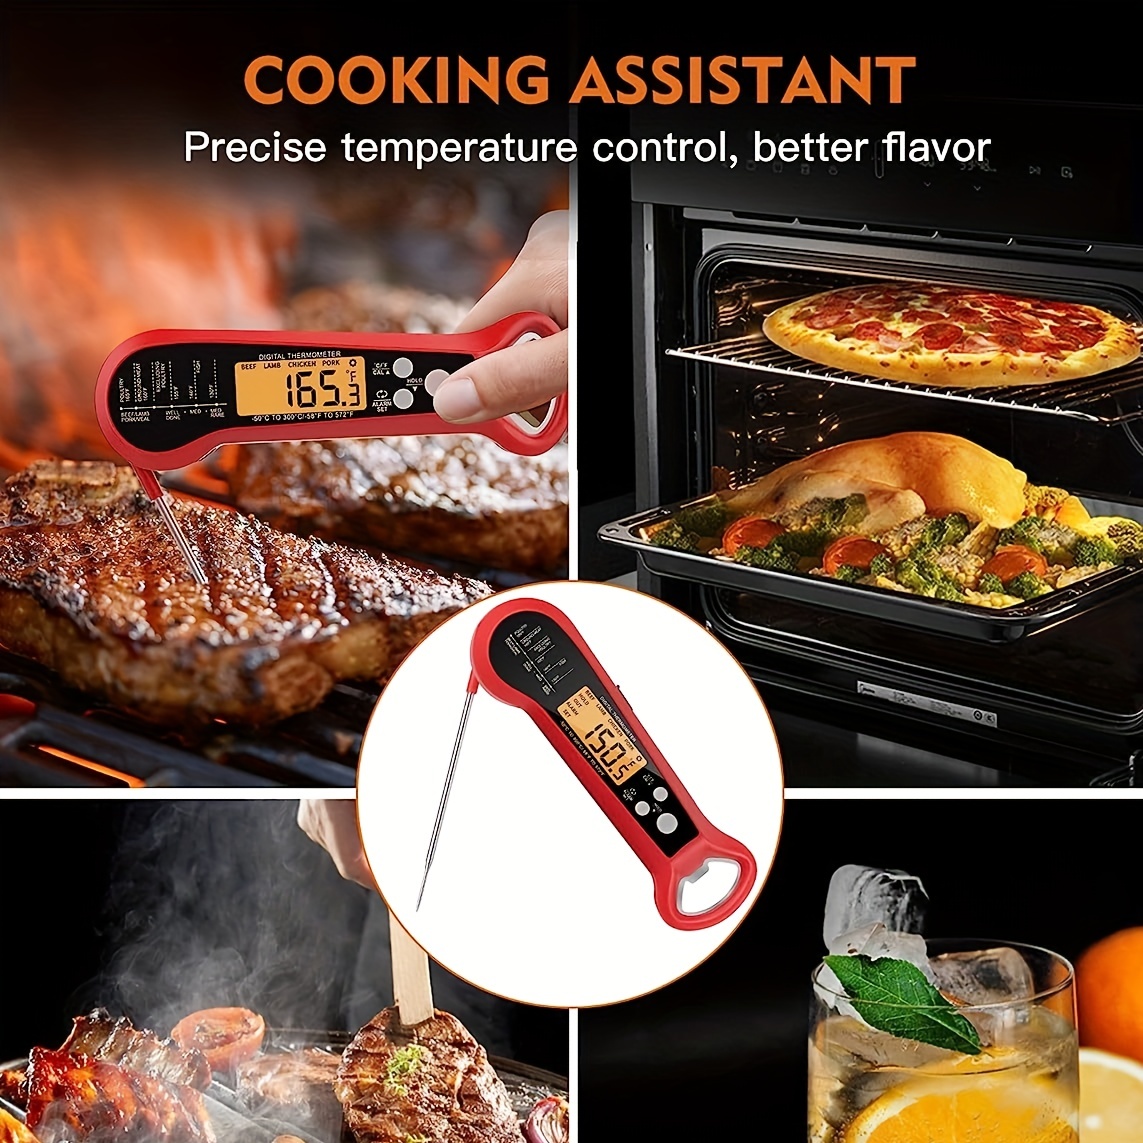 Meat Thermometer for Grilling, Food Thermometer for Cooking, Milk, Meat  Thermometers for Grilling Cooking, Kitchen Instant Read Thermometer, Pocket